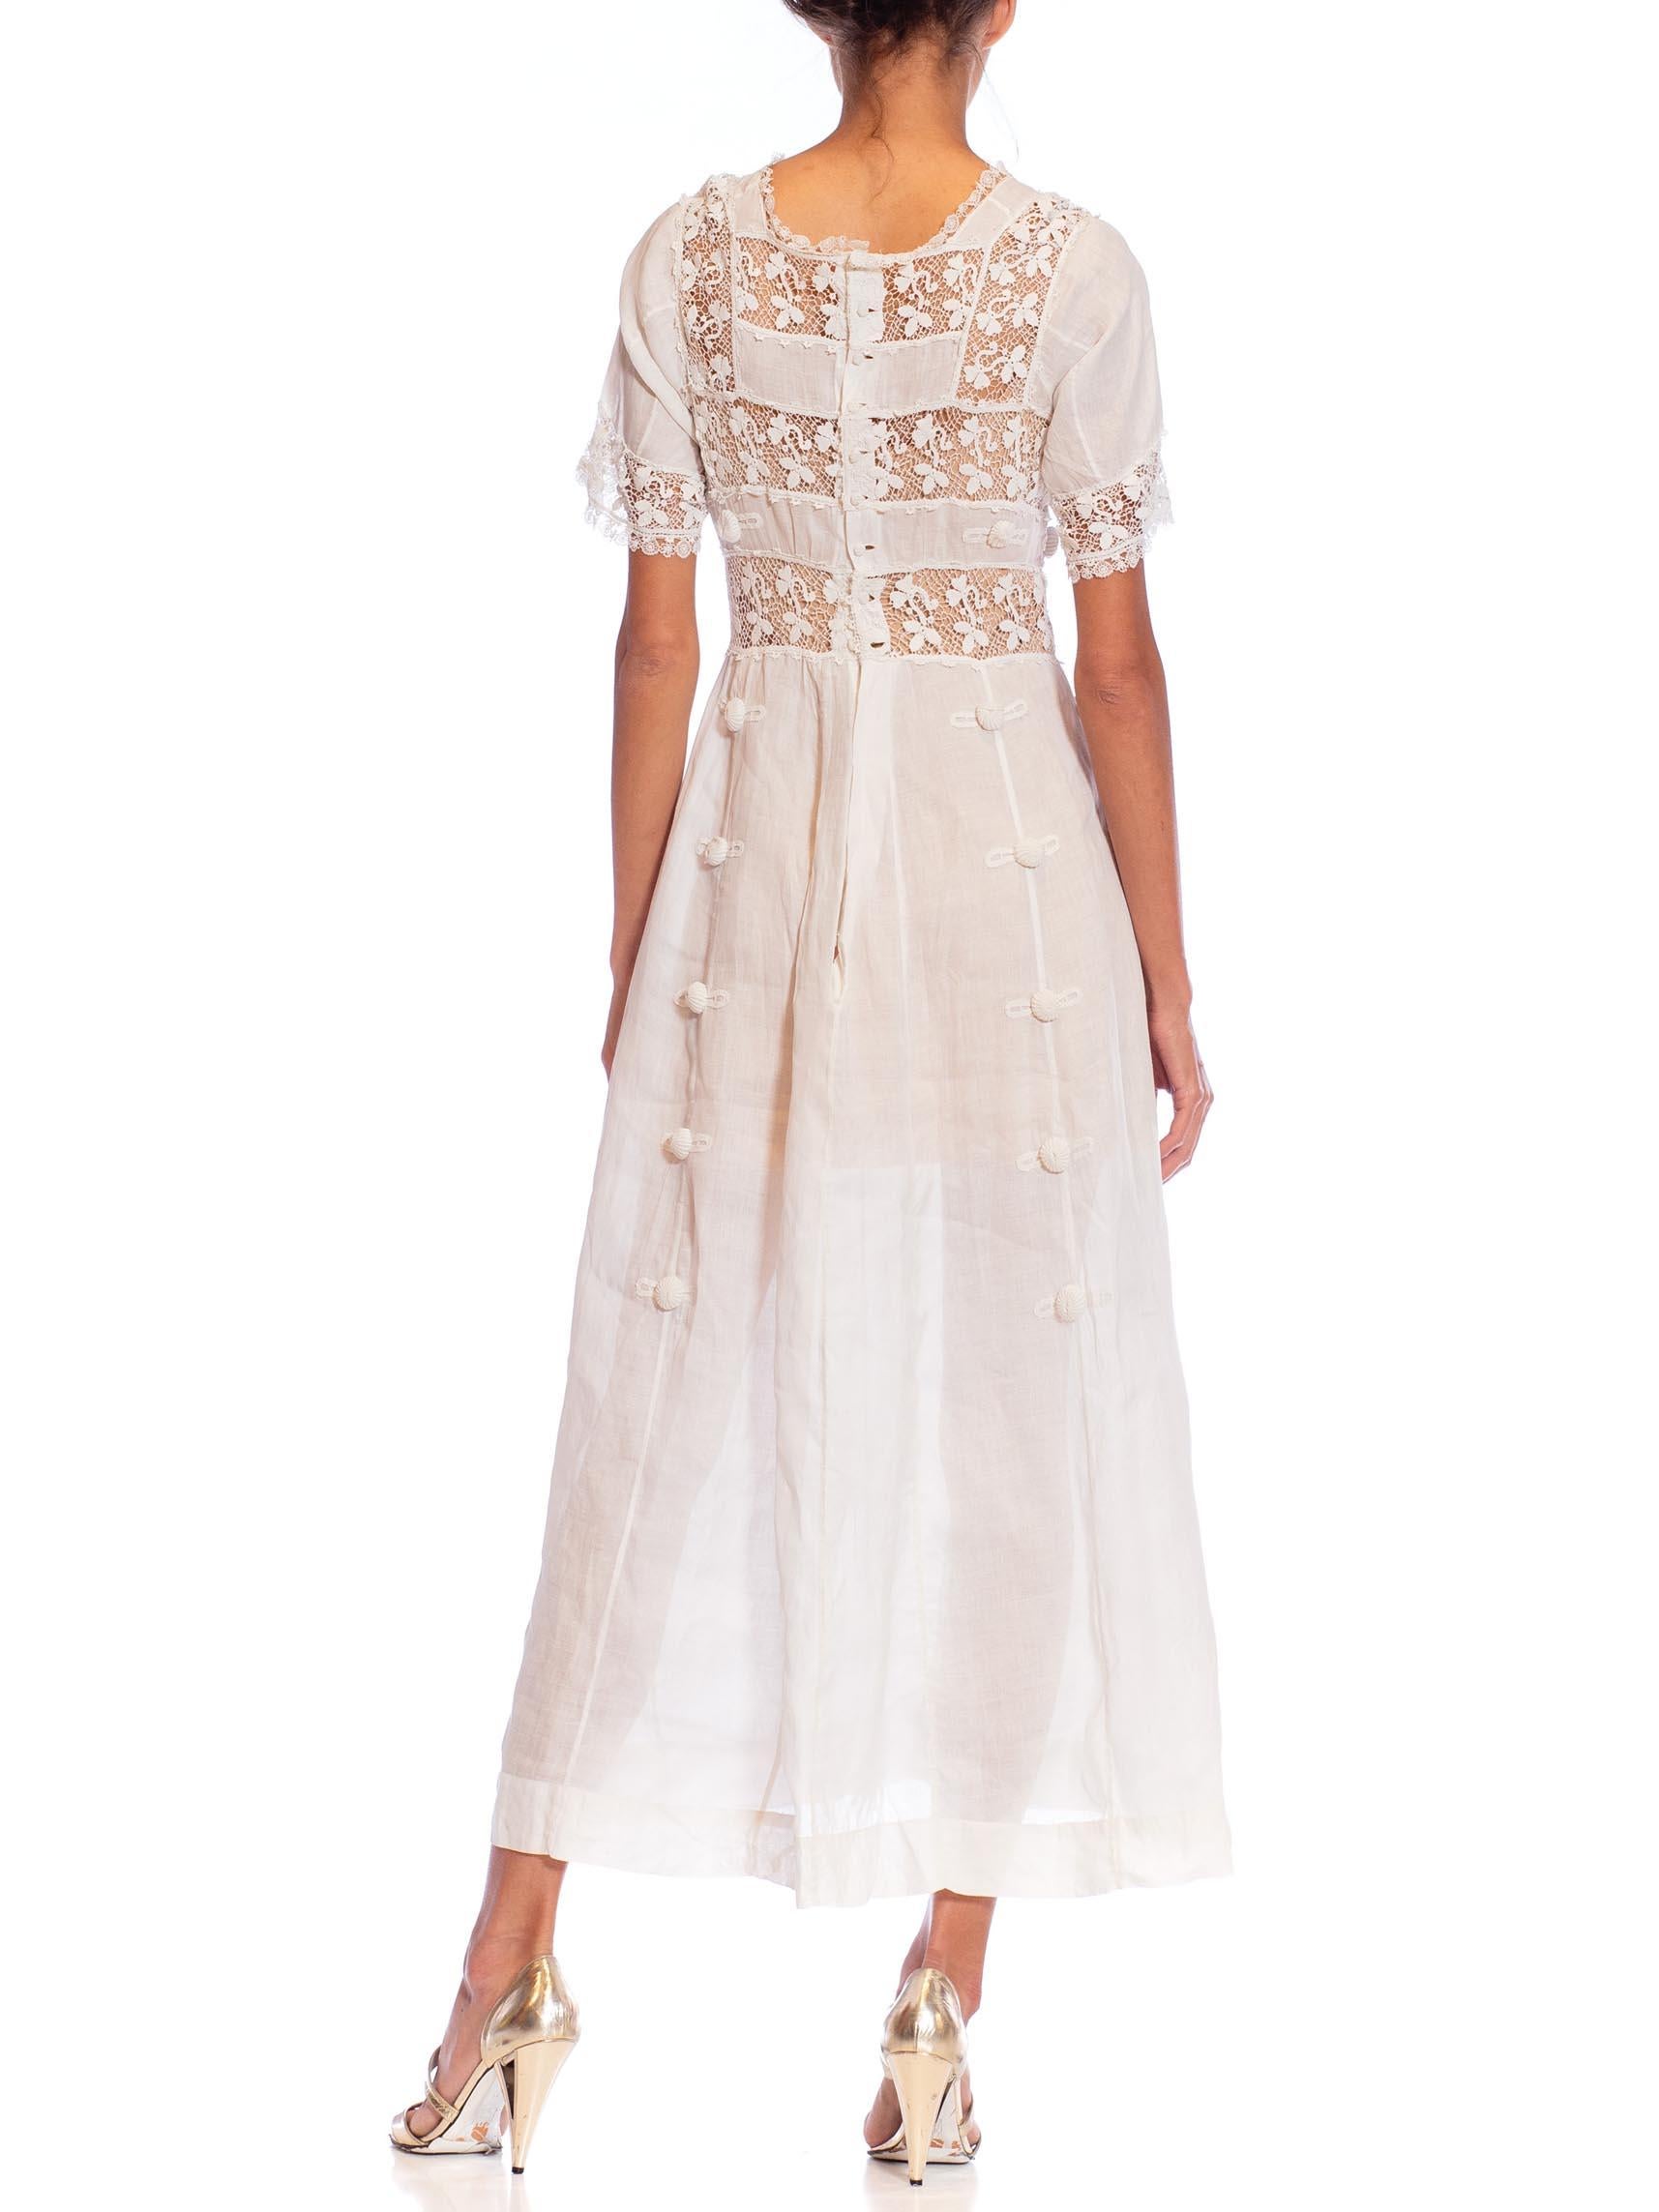 Edwardian White Linen & Lace Tea Dress With Sleeves For Sale 3